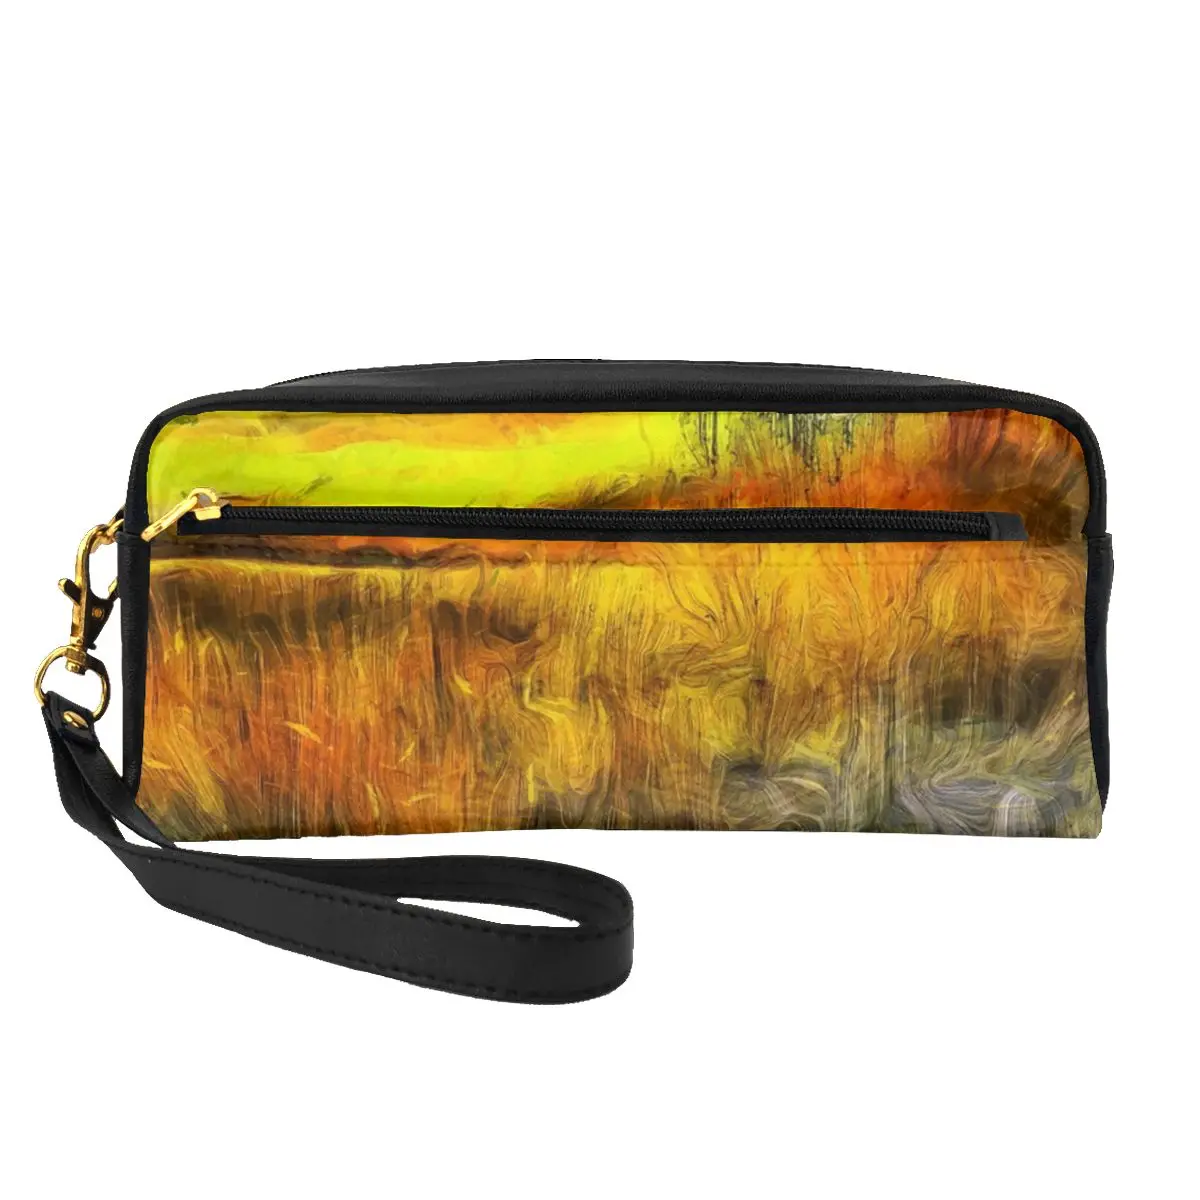 

Van Gogh Leather Storage Organizers The Sunset River Woman Makeup Pouch Multi-purpose Travel Cosmetic Bags